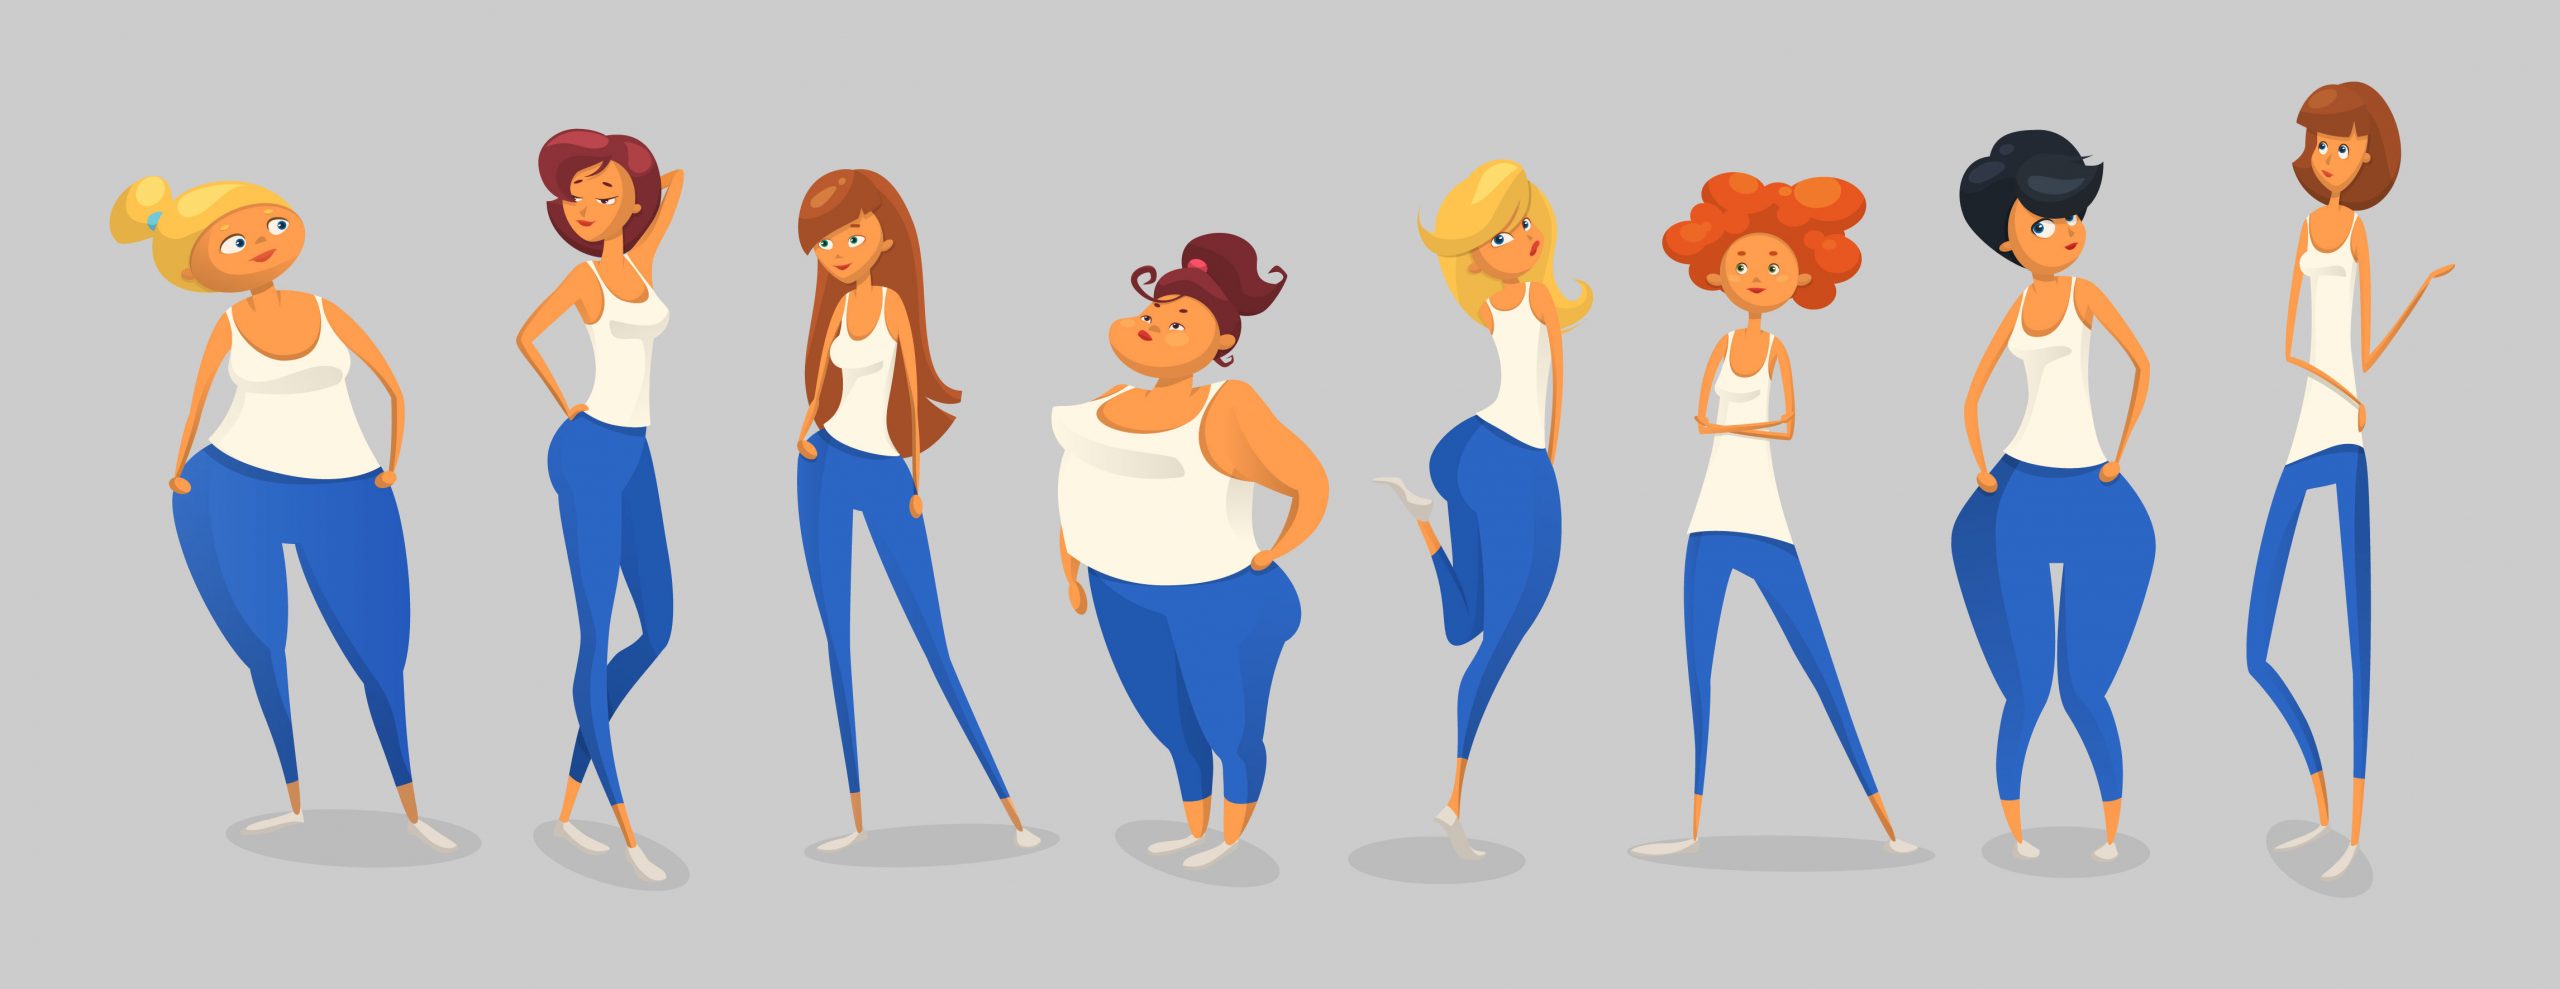 Heavy picture. Waist cartoon. Different body Shapes pictures.